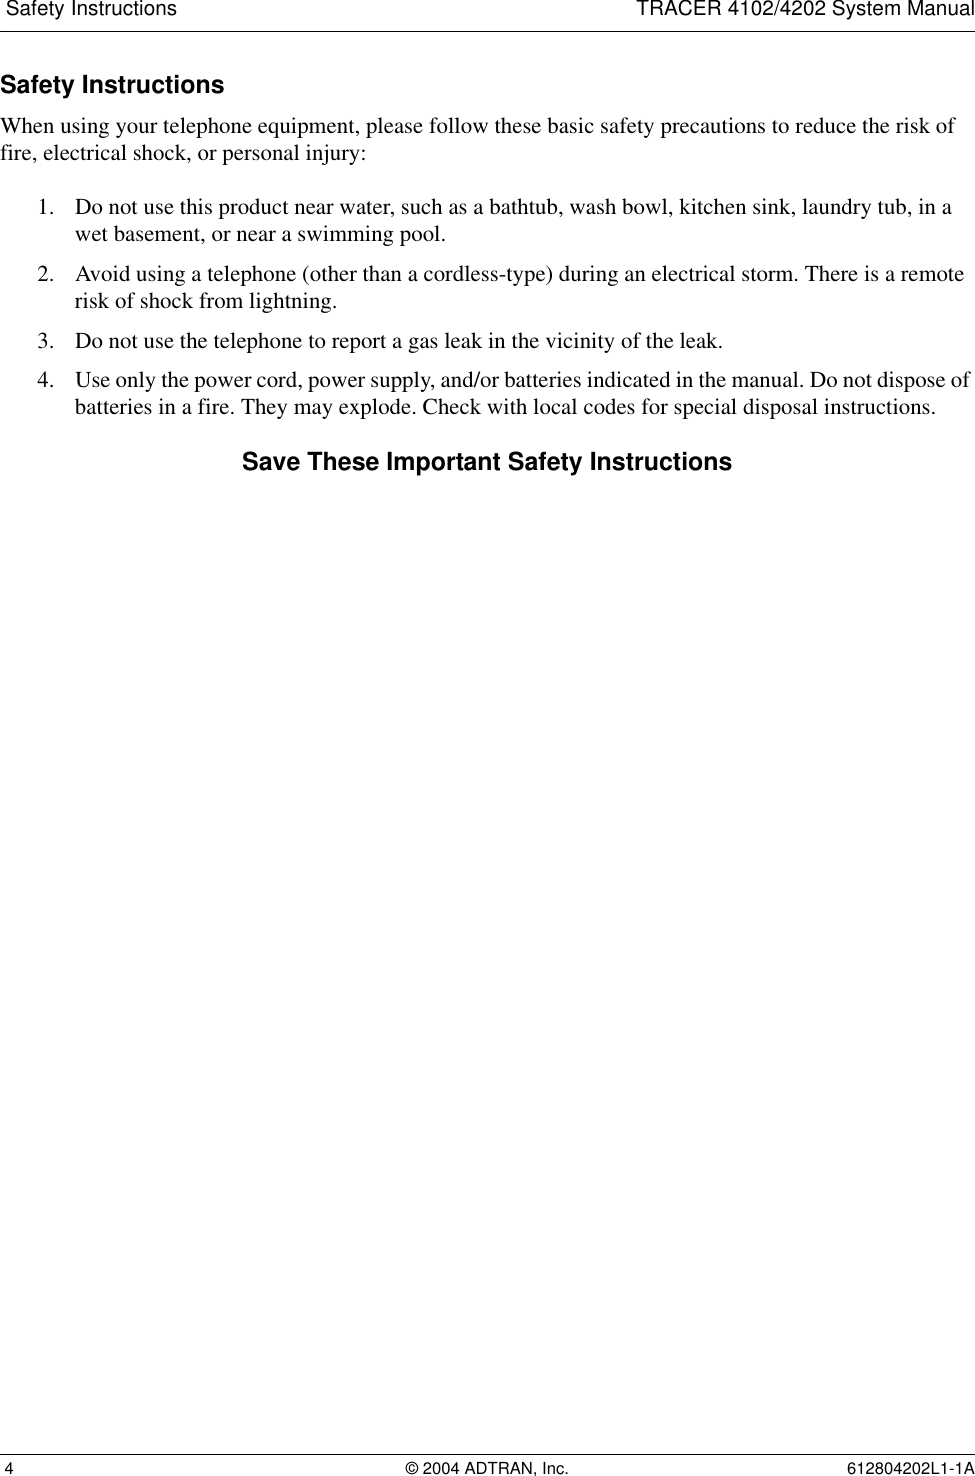  Safety Instructions TRACER 4102/4202 System Manual 4 © 2004 ADTRAN, Inc. 612804202L1-1ASafety InstructionsWhen using your telephone equipment, please follow these basic safety precautions to reduce the risk of fire, electrical shock, or personal injury:1. Do not use this product near water, such as a bathtub, wash bowl, kitchen sink, laundry tub, in a wet basement, or near a swimming pool.2. Avoid using a telephone (other than a cordless-type) during an electrical storm. There is a remote risk of shock from lightning.3. Do not use the telephone to report a gas leak in the vicinity of the leak.4. Use only the power cord, power supply, and/or batteries indicated in the manual. Do not dispose of batteries in a fire. They may explode. Check with local codes for special disposal instructions.Save These Important Safety Instructions